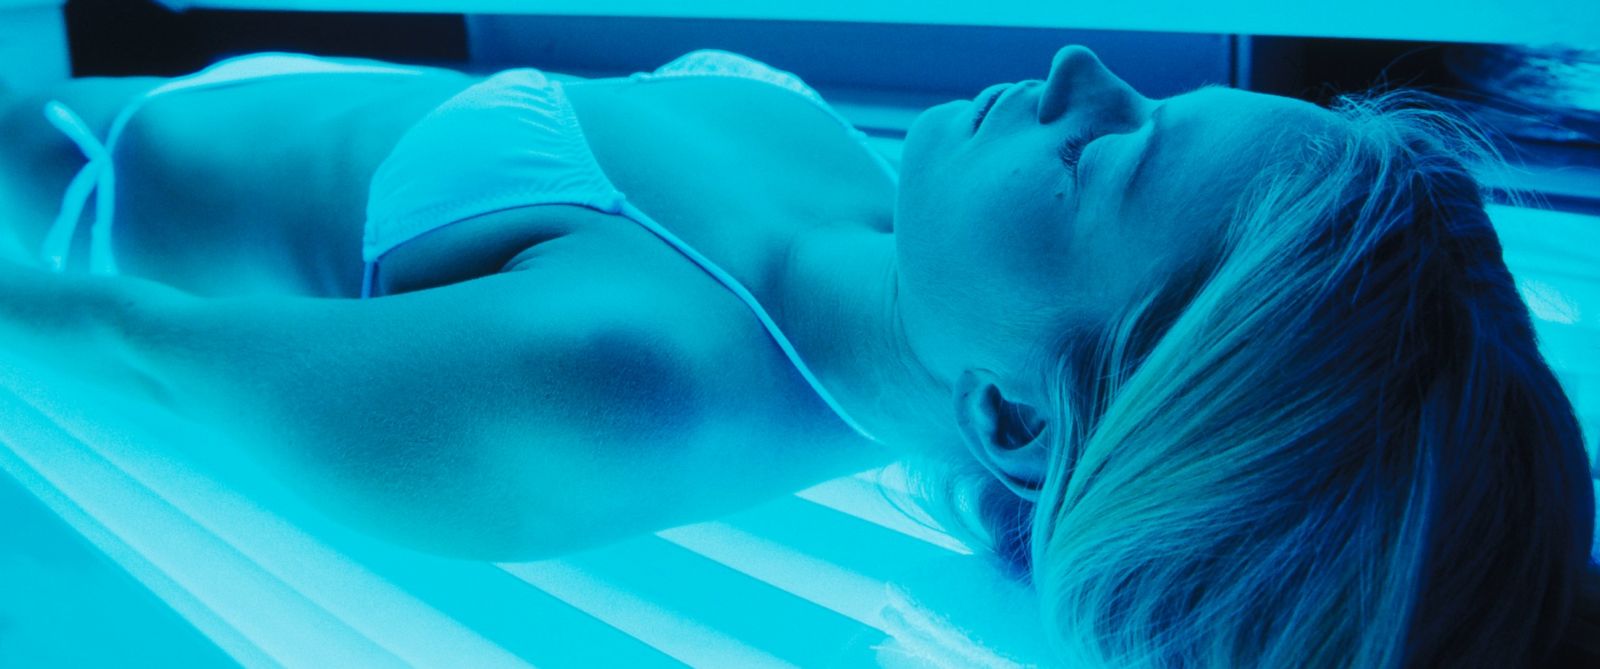 No Shortage of Tanning Beds for Students at Top Colleges ...